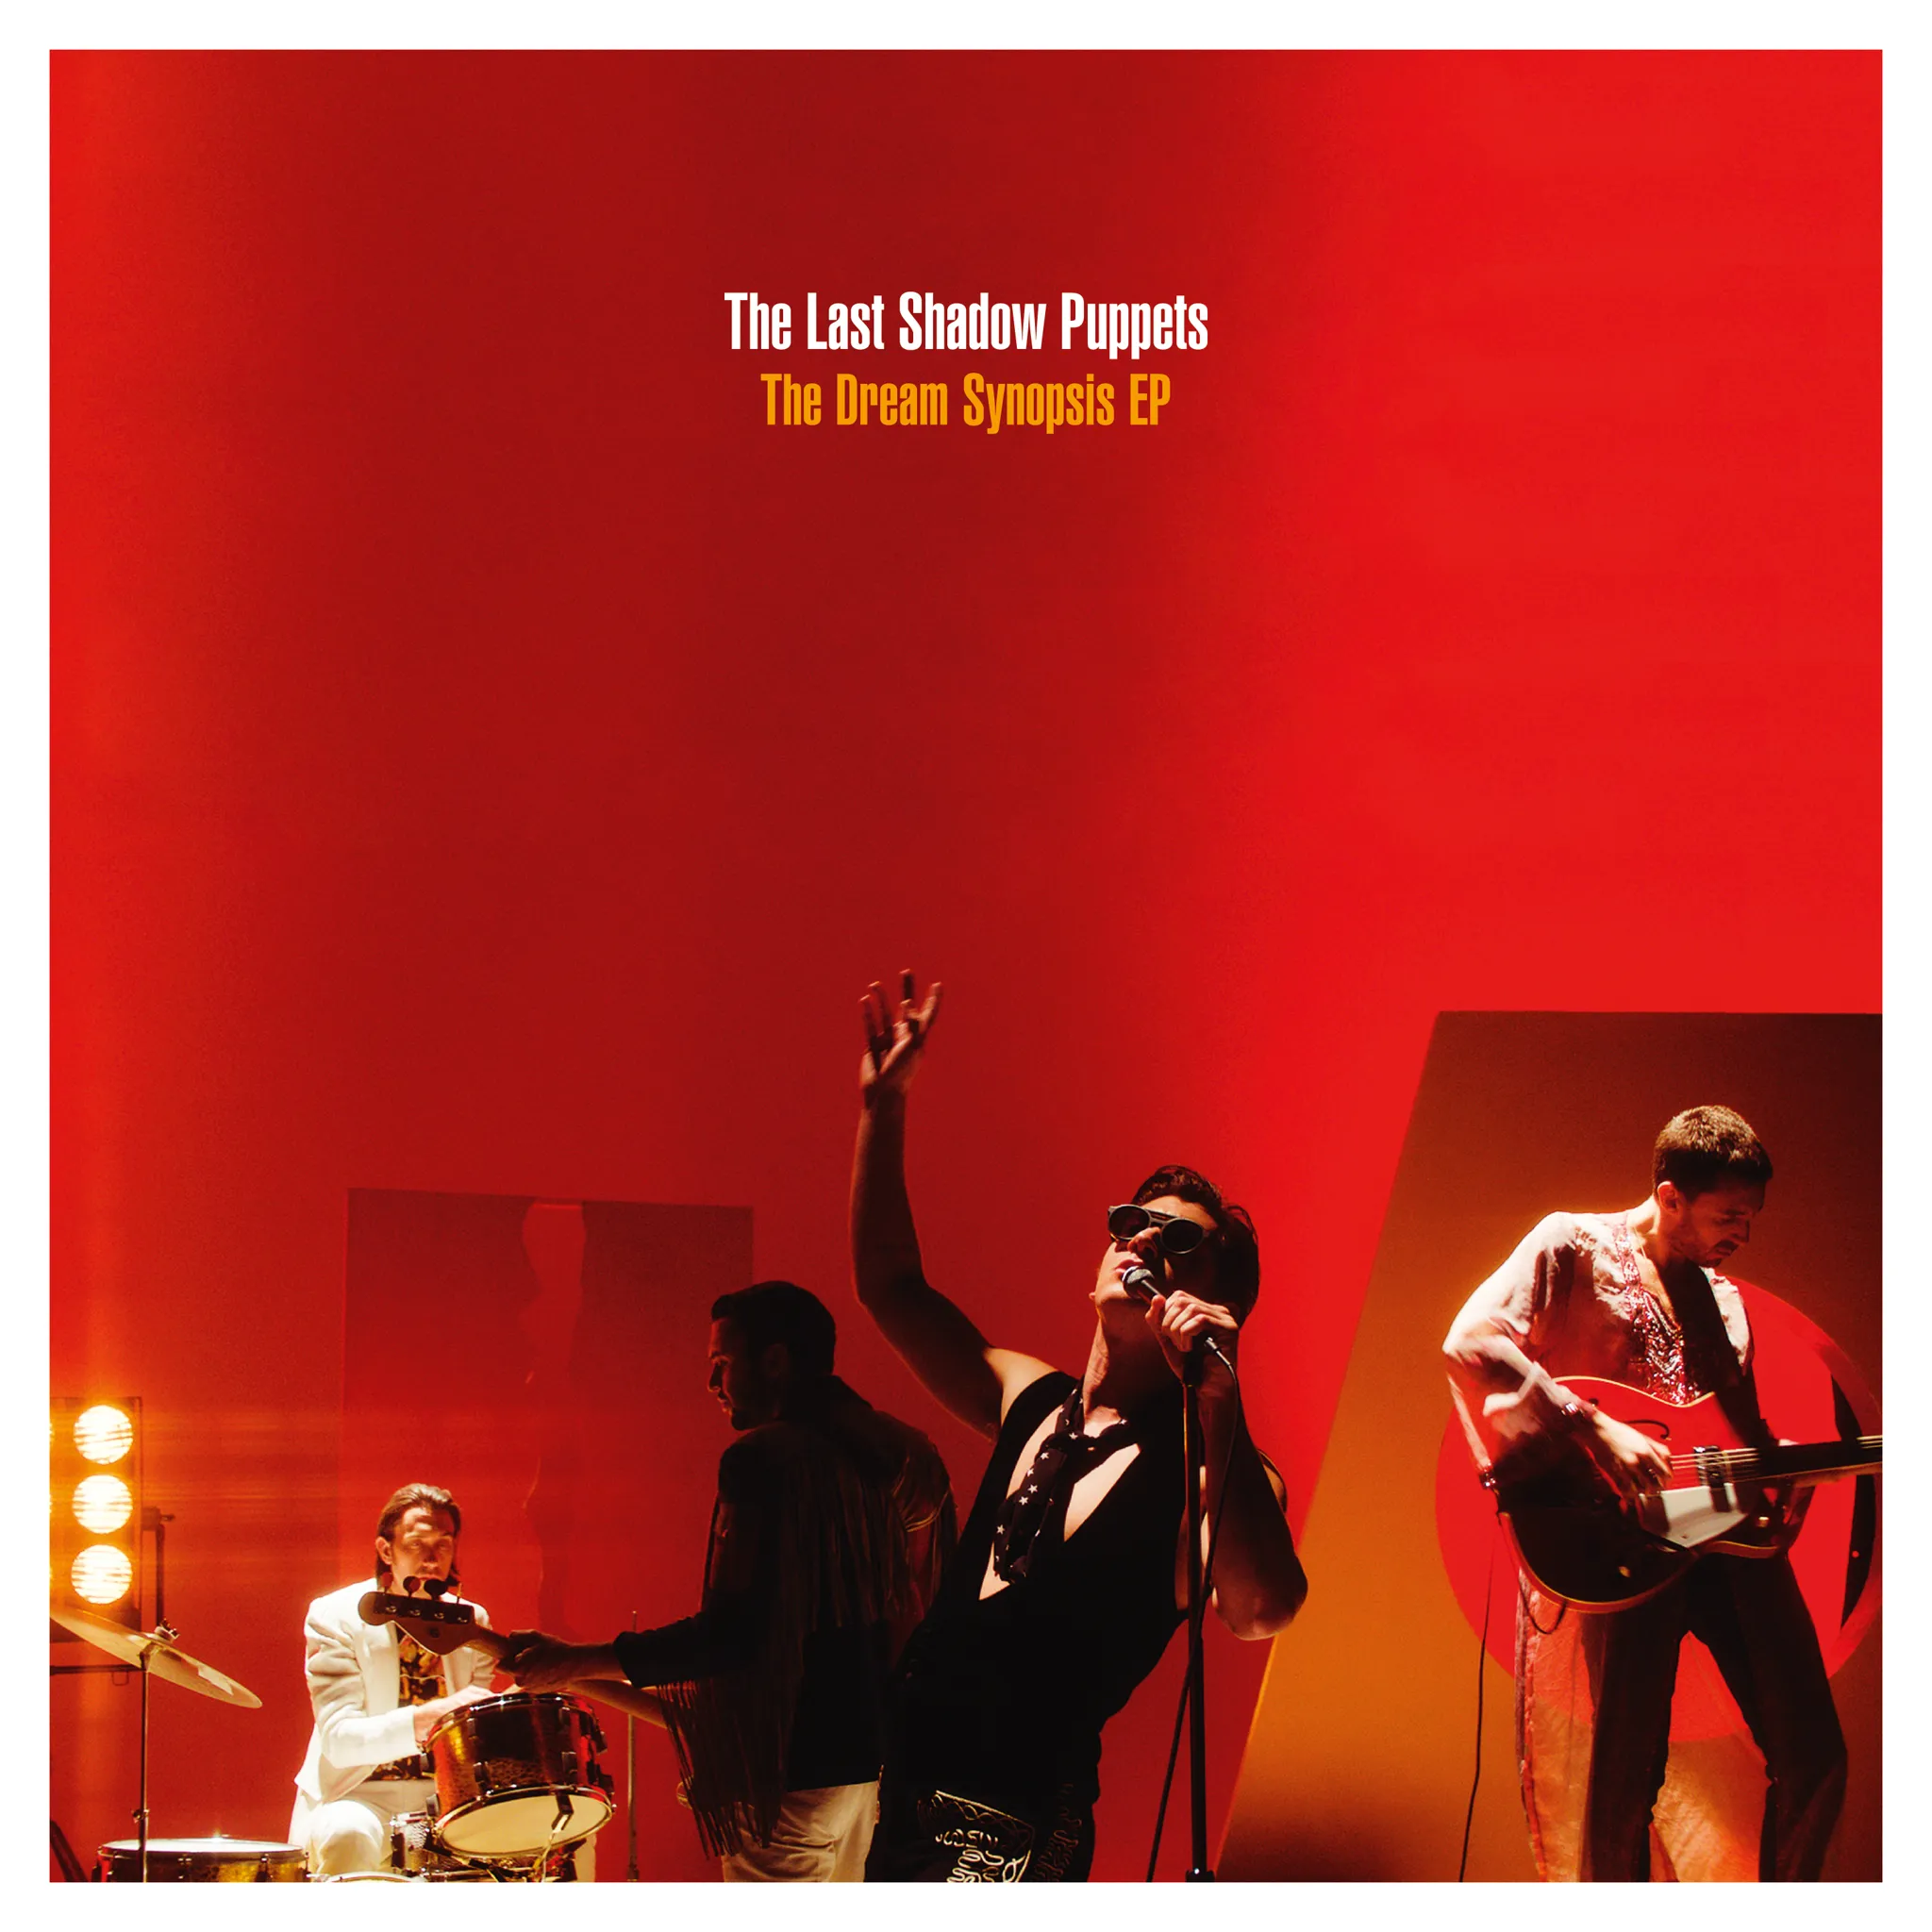 <strong>The Last Shadow Puppets - The Dream Synopsis EP</strong> (Vinyl 12)